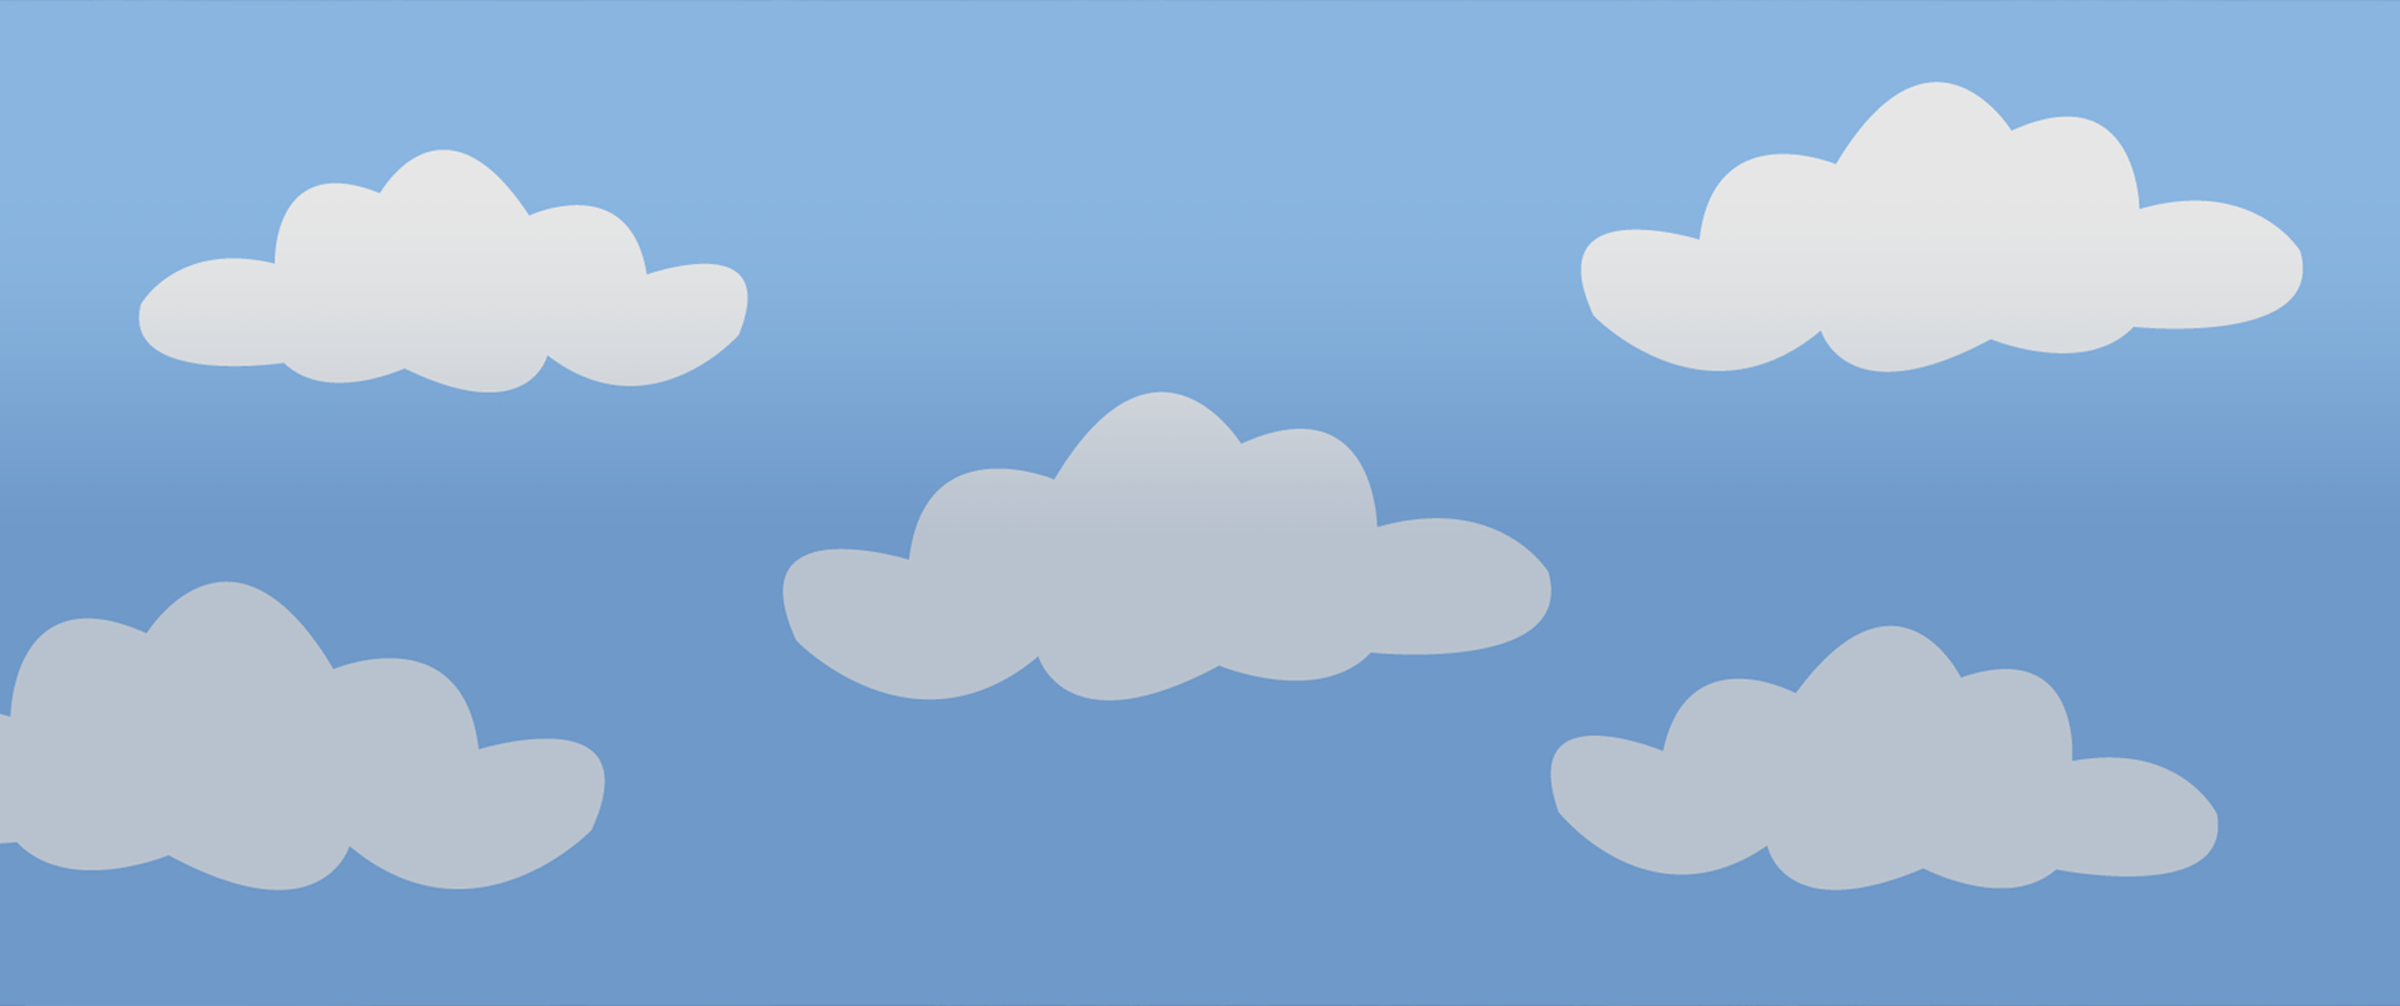 Graphic with clouds in blue sky